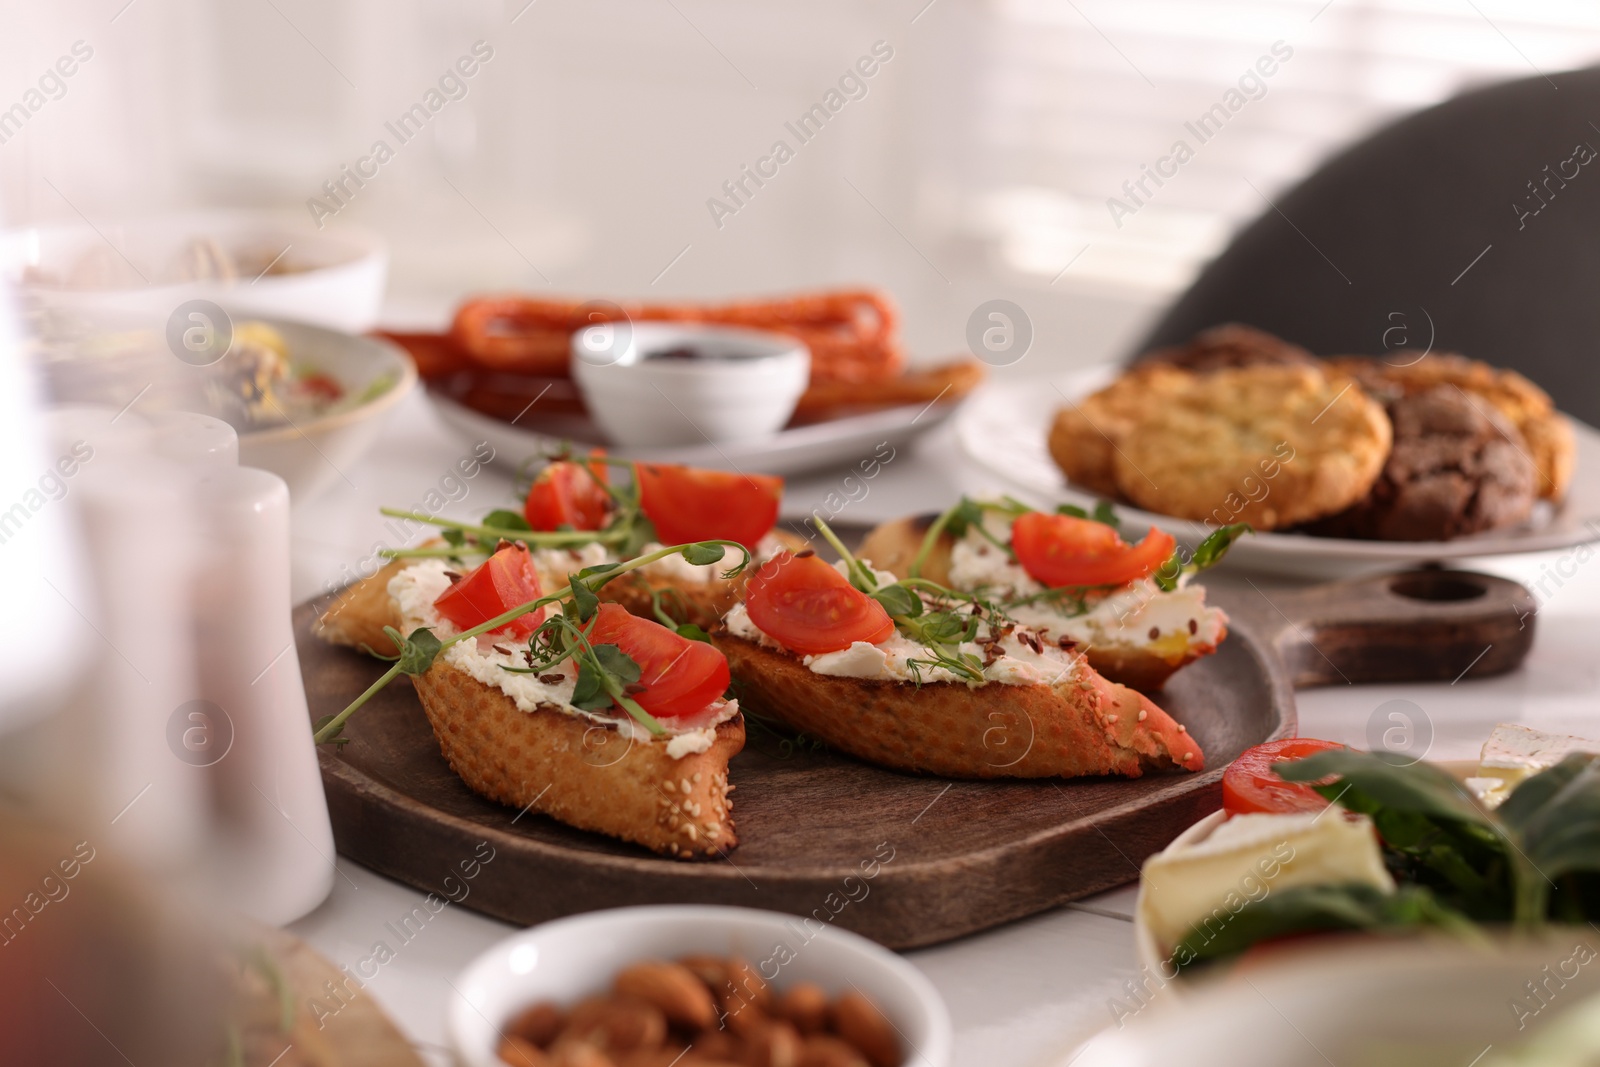 Photo of Delicious sandwiches with cheese and tomatoes served on buffet table for brunch